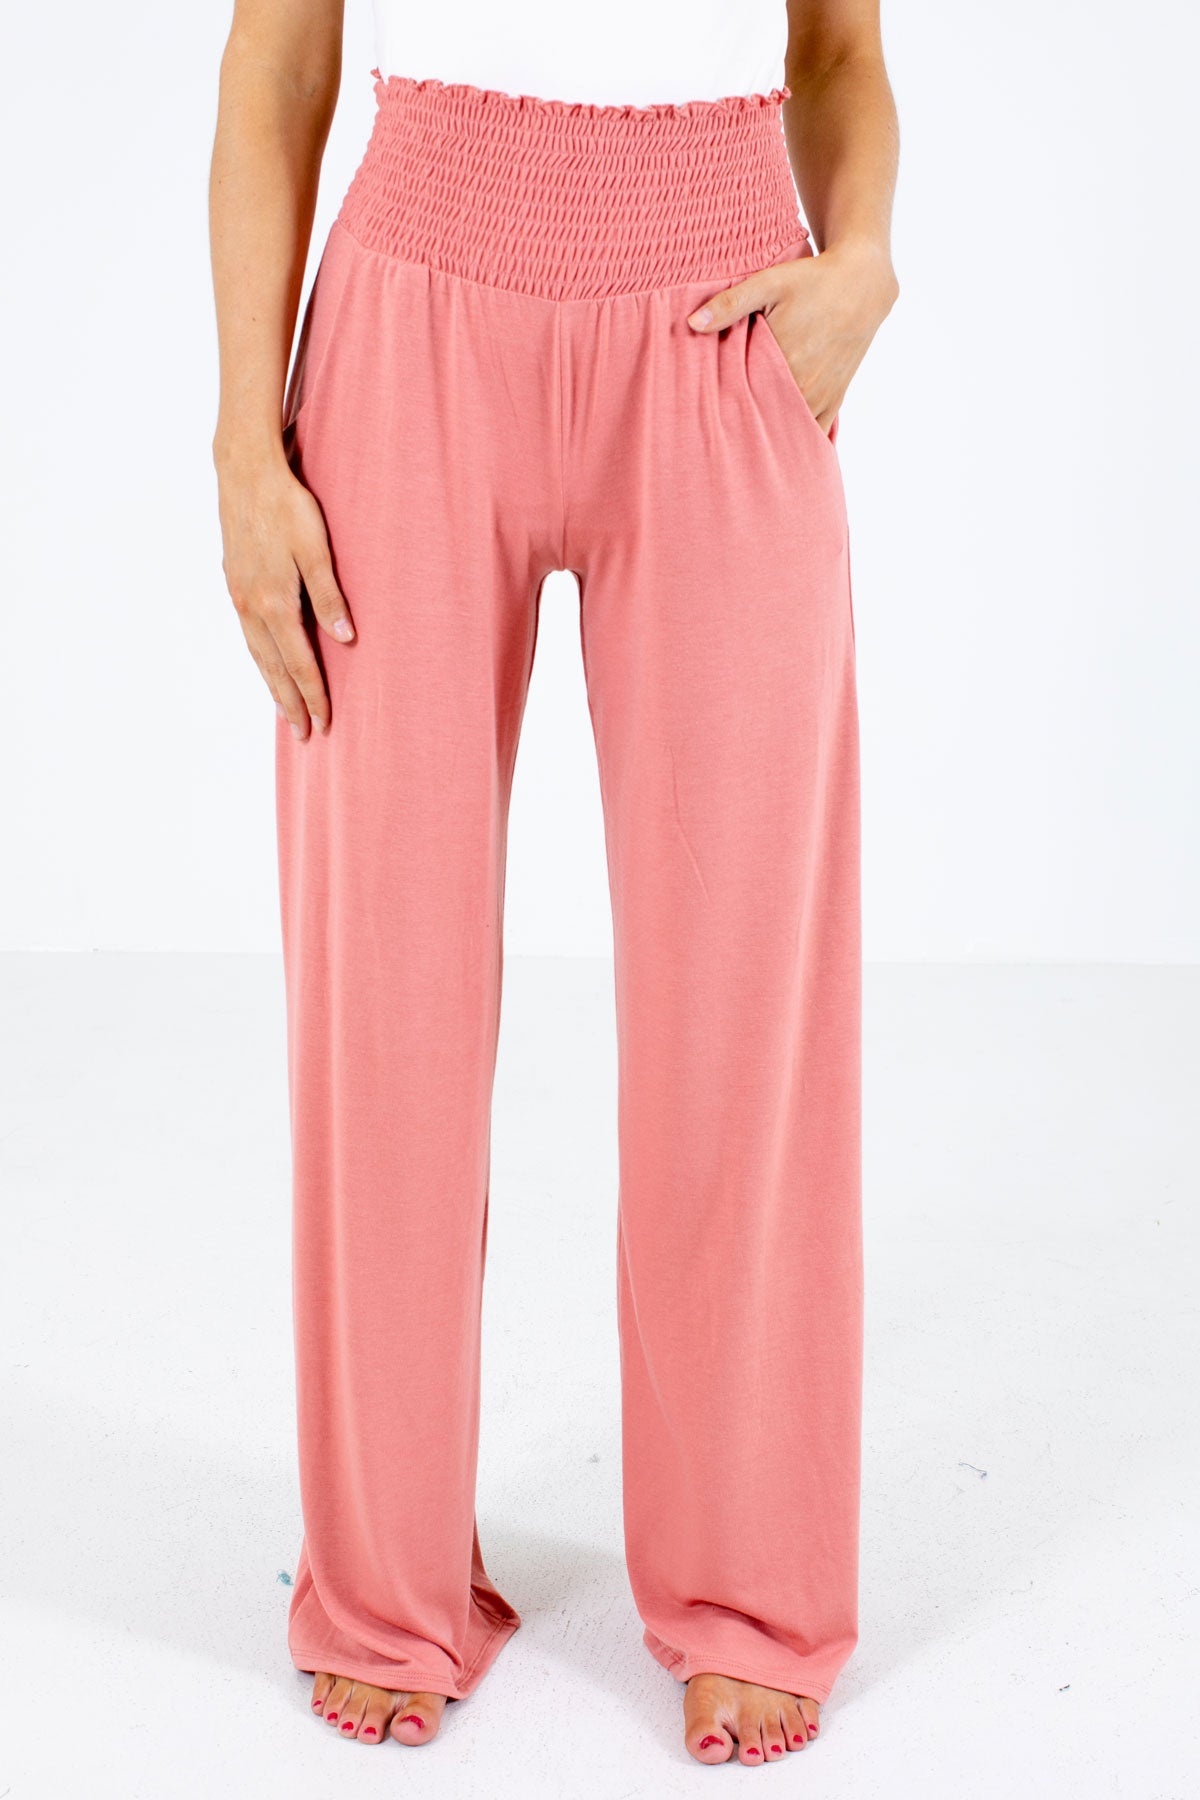 Women's Pink Spring and Summertime Boutique Clothing